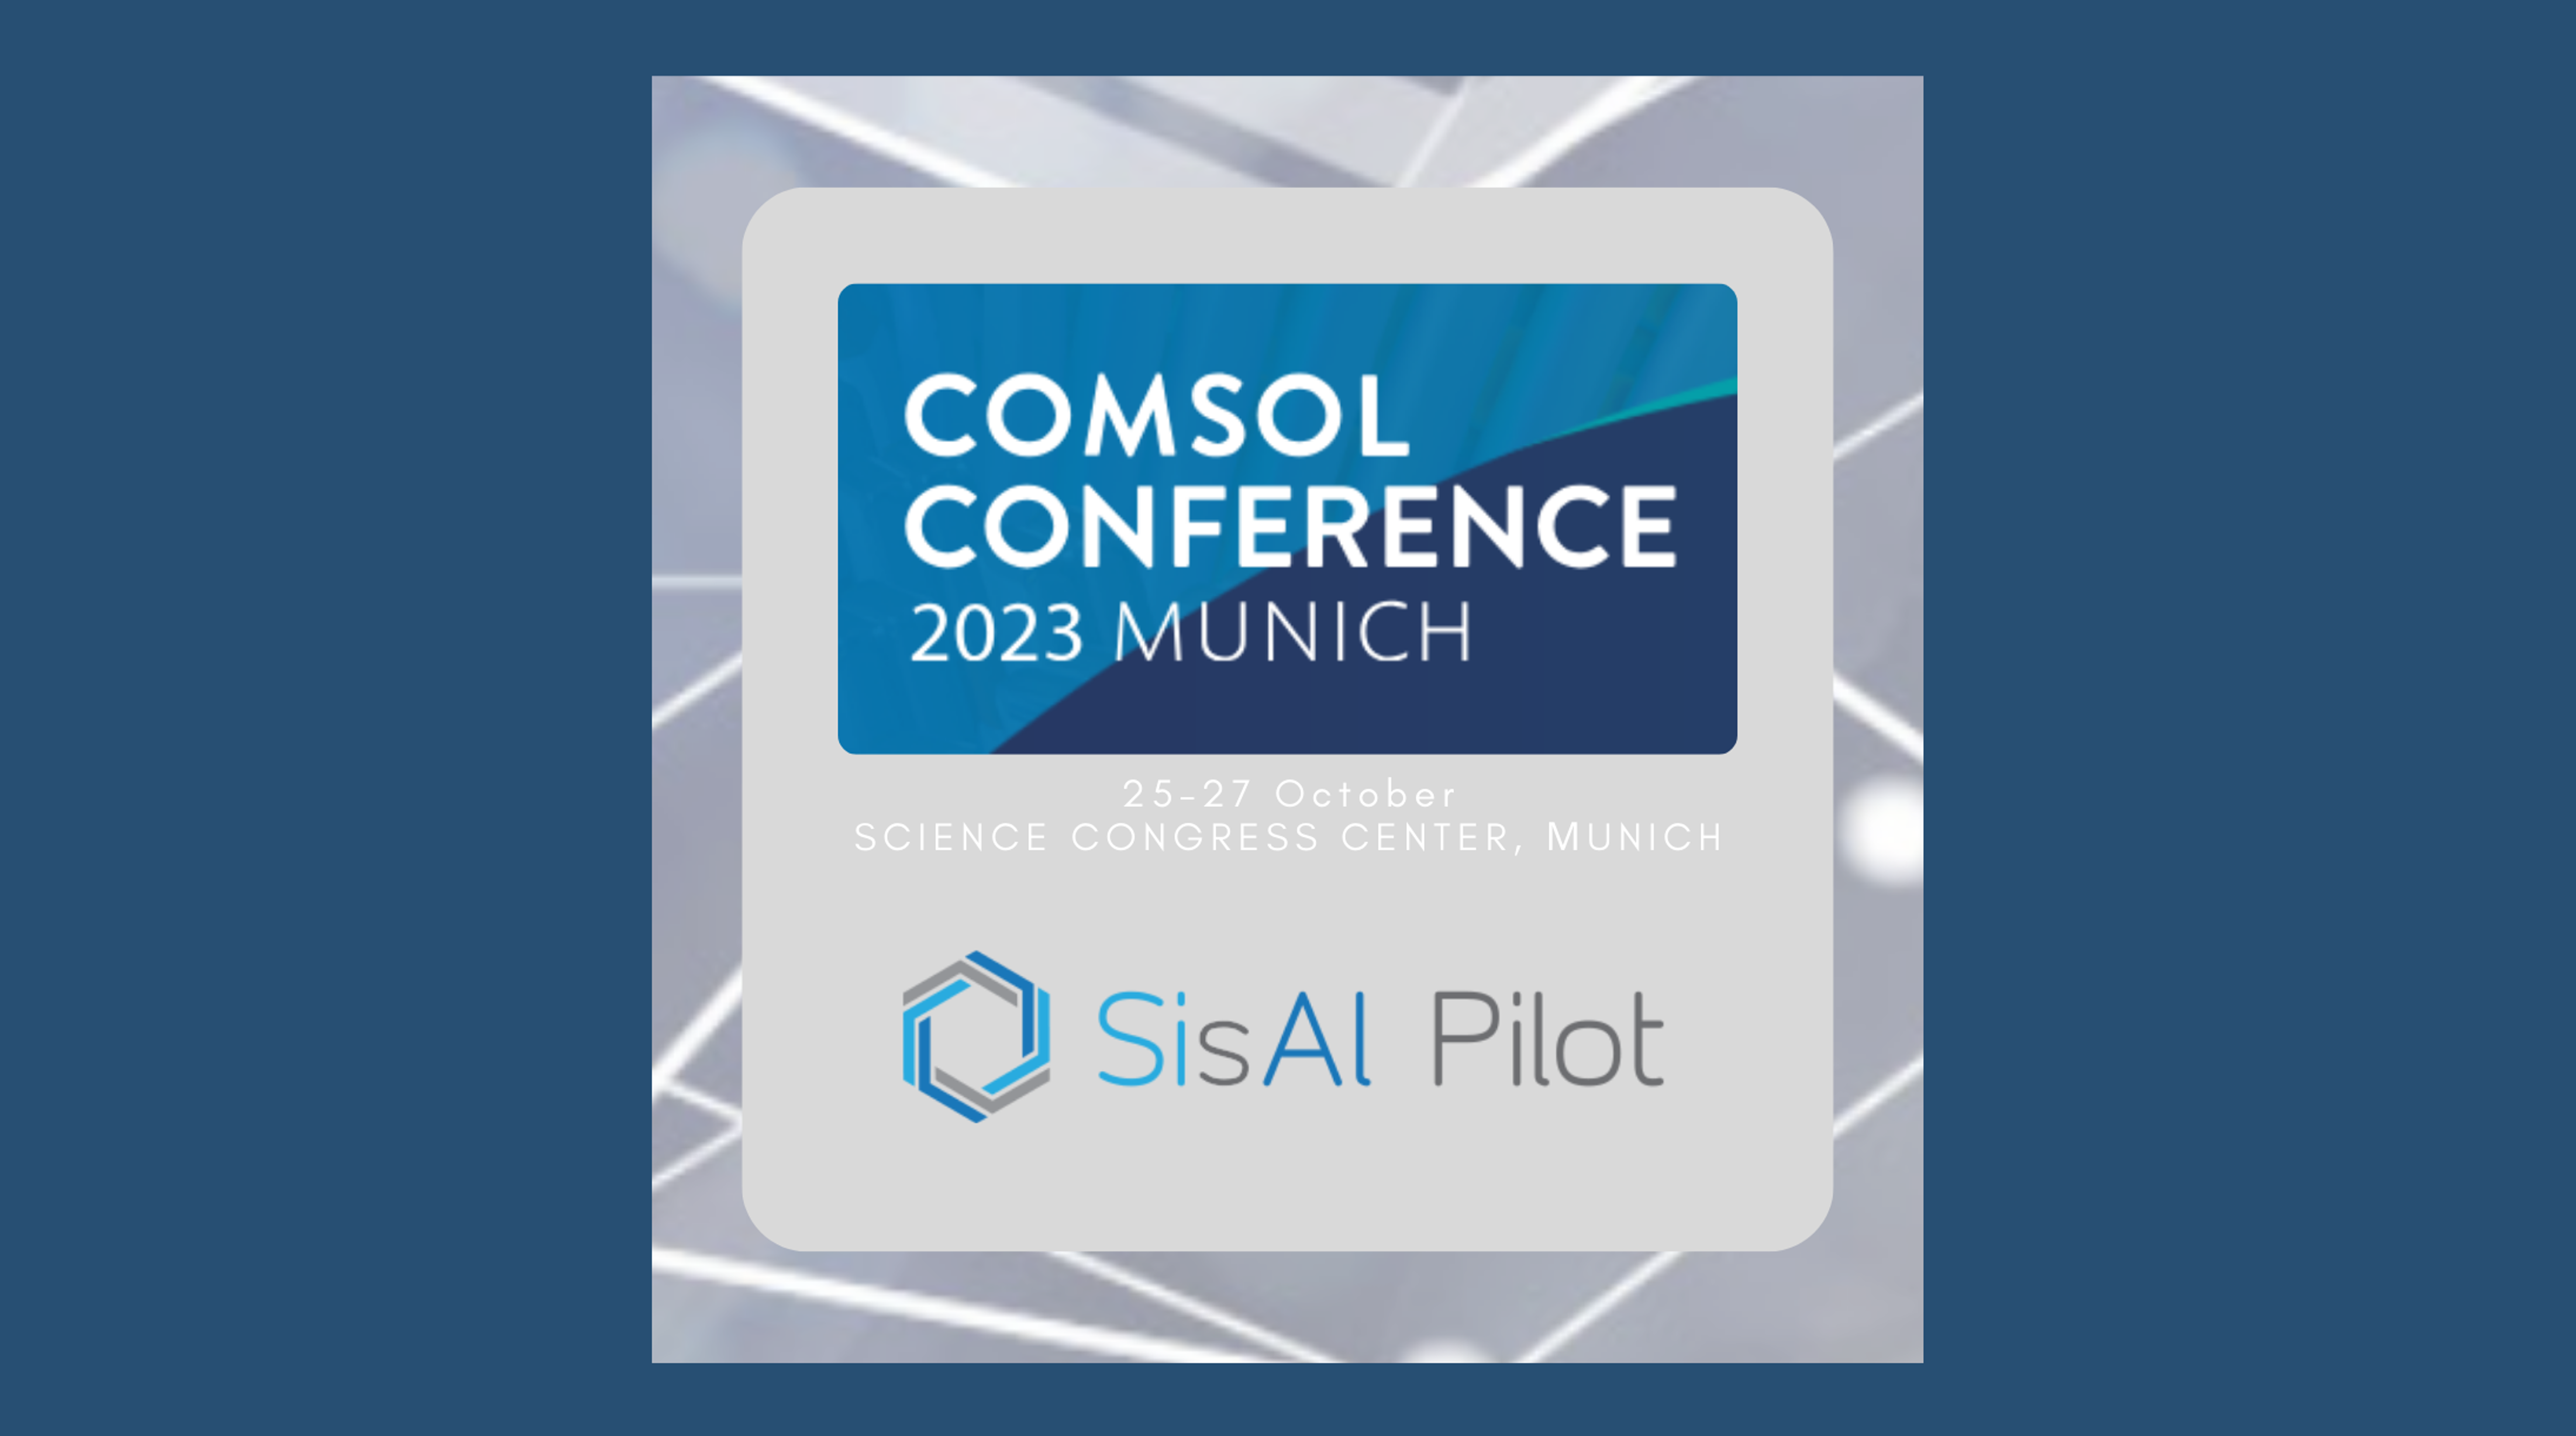 SisAl Pilot at the COMSOL Conference 2023